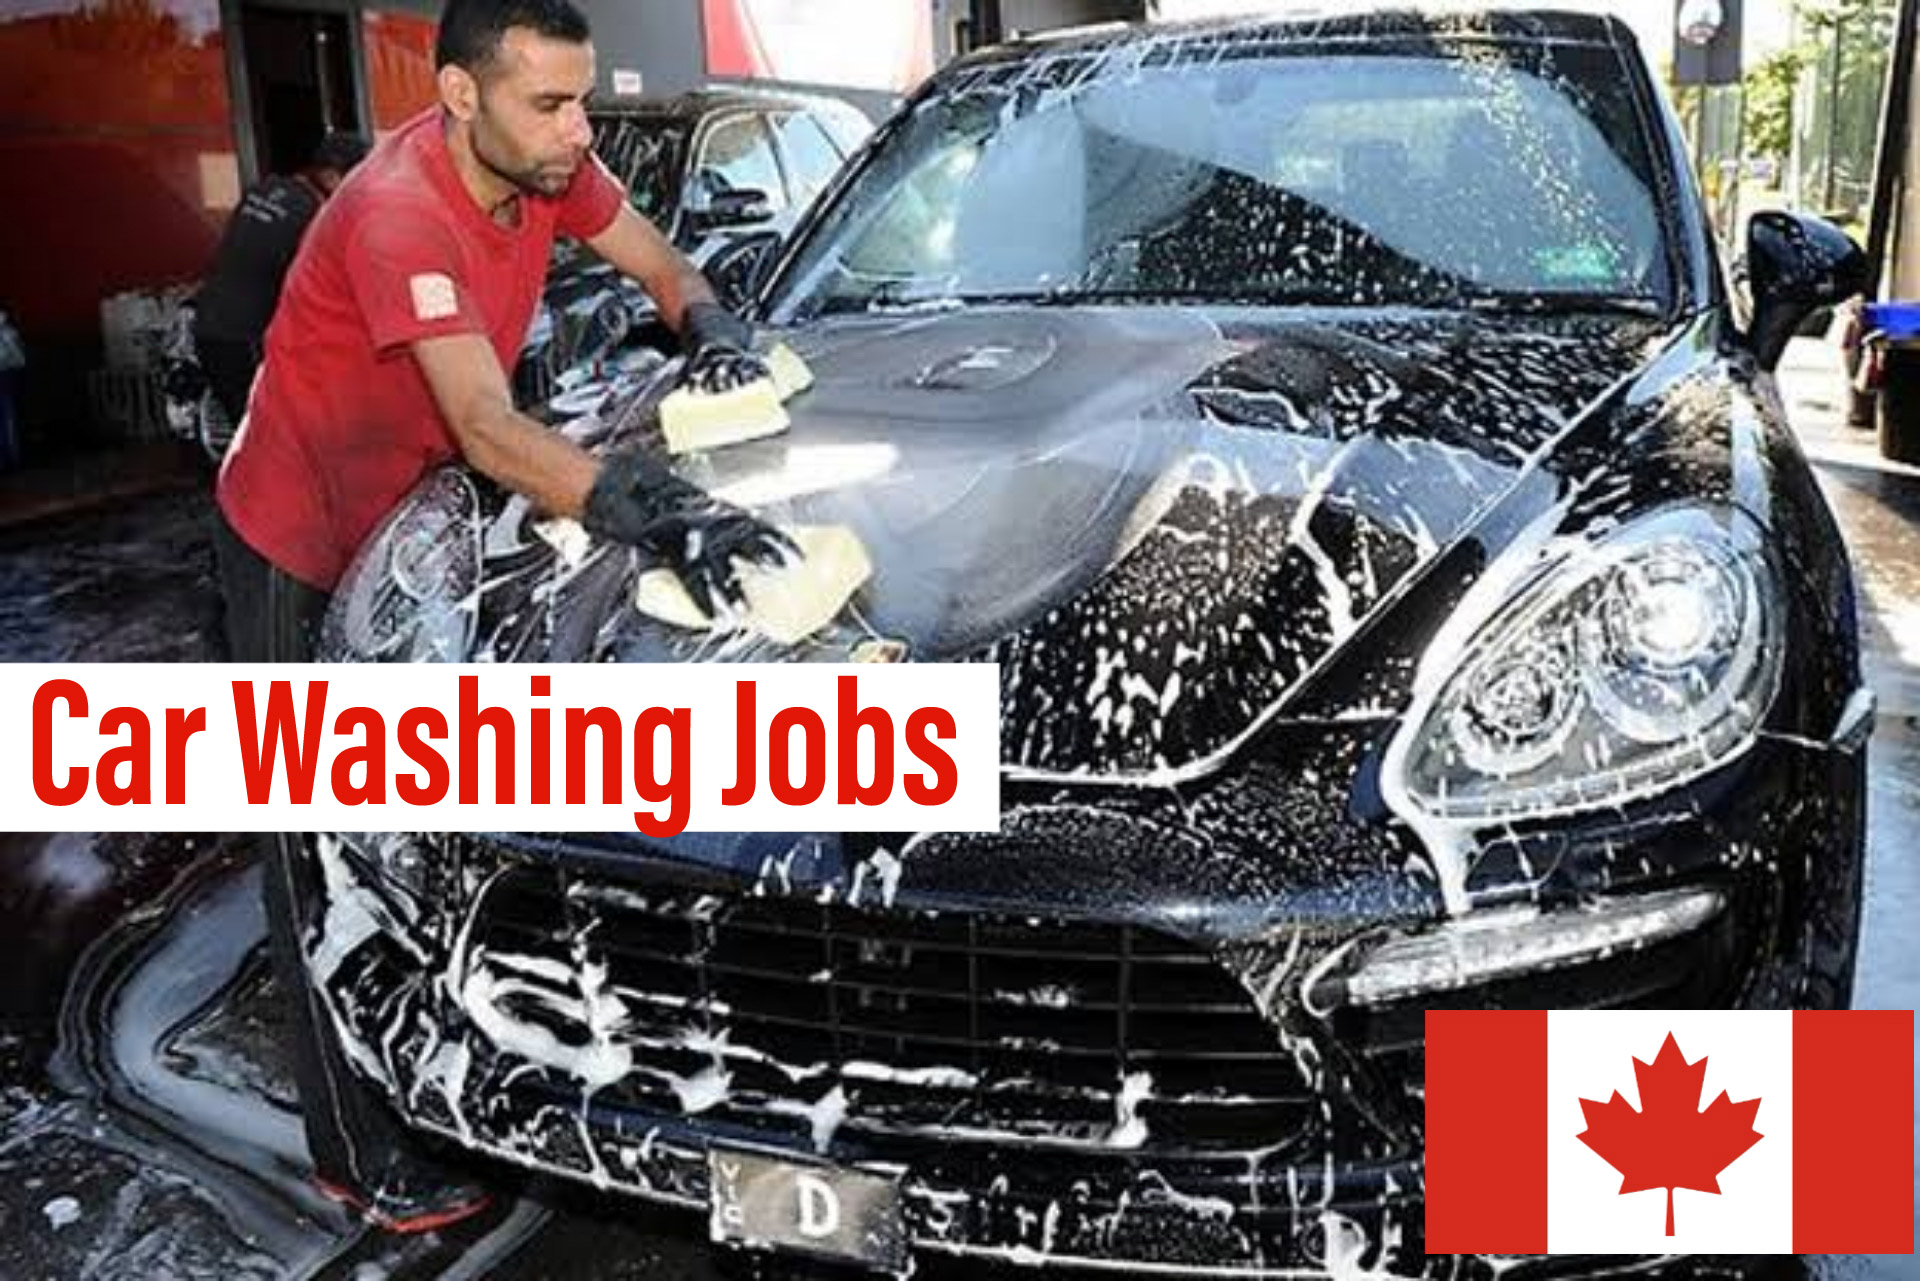 Car Washing Jobs In Canada | See Application Process